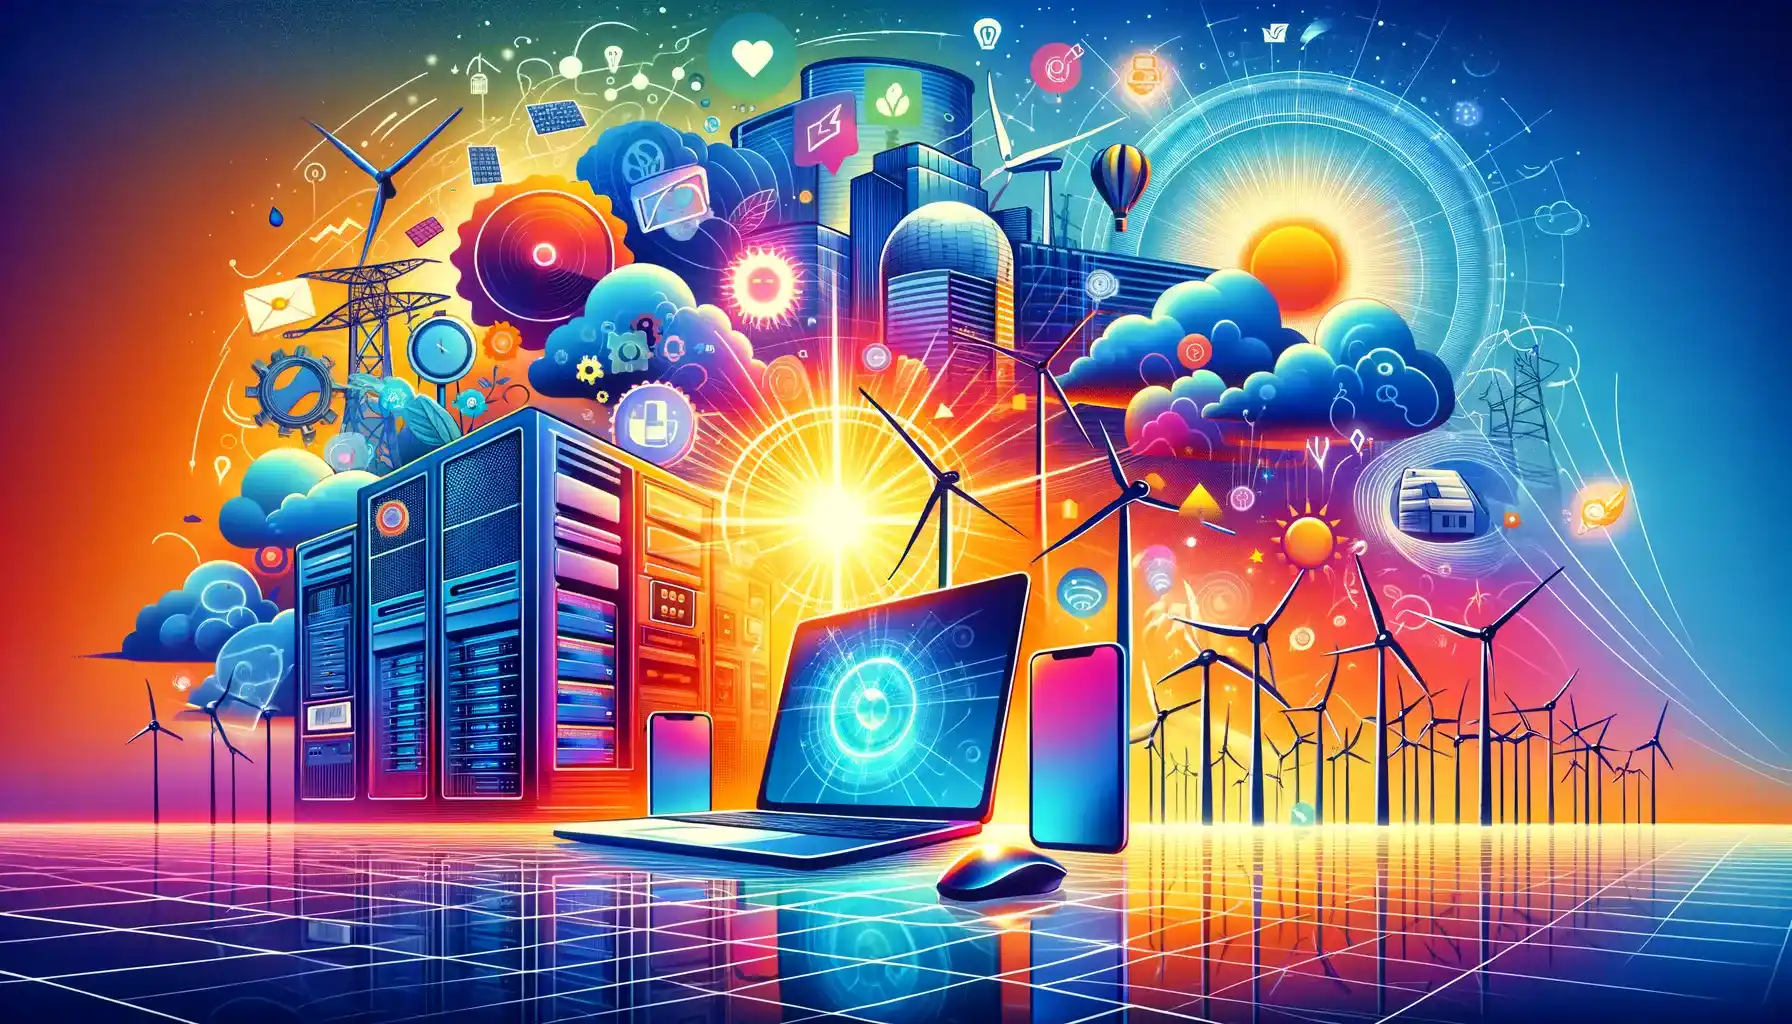 Energy Consumption in the Digital Age